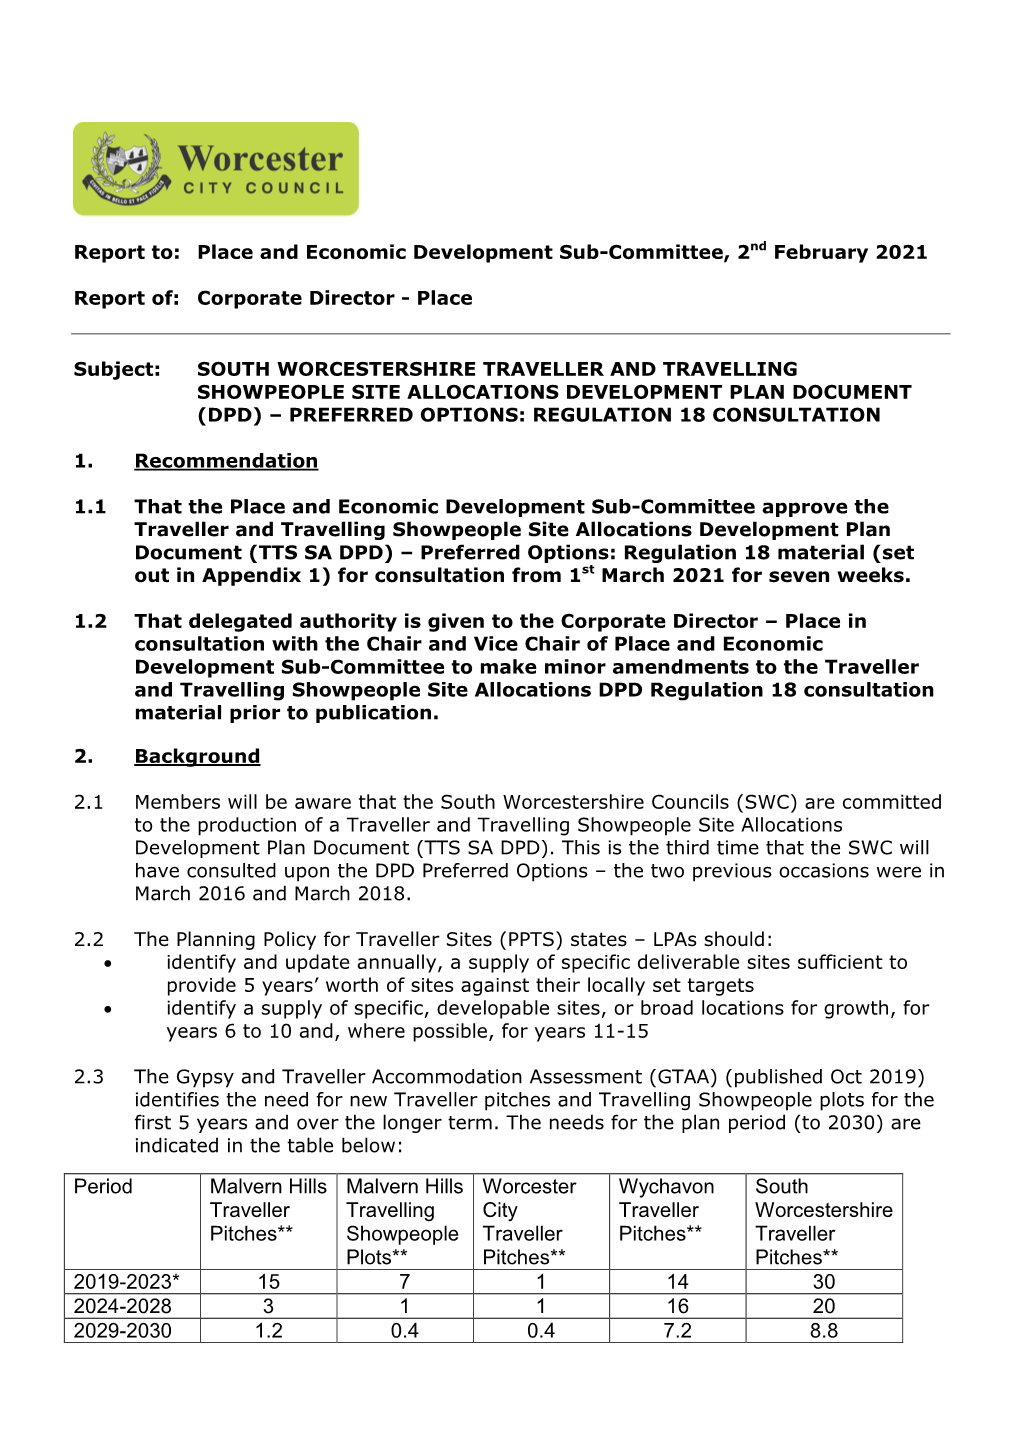 South Worcestershire Traveller and Travelling Showpeople Site Allocations Development Plan Document (Dpd) – Preferred Options: Regulation 18 Consultation